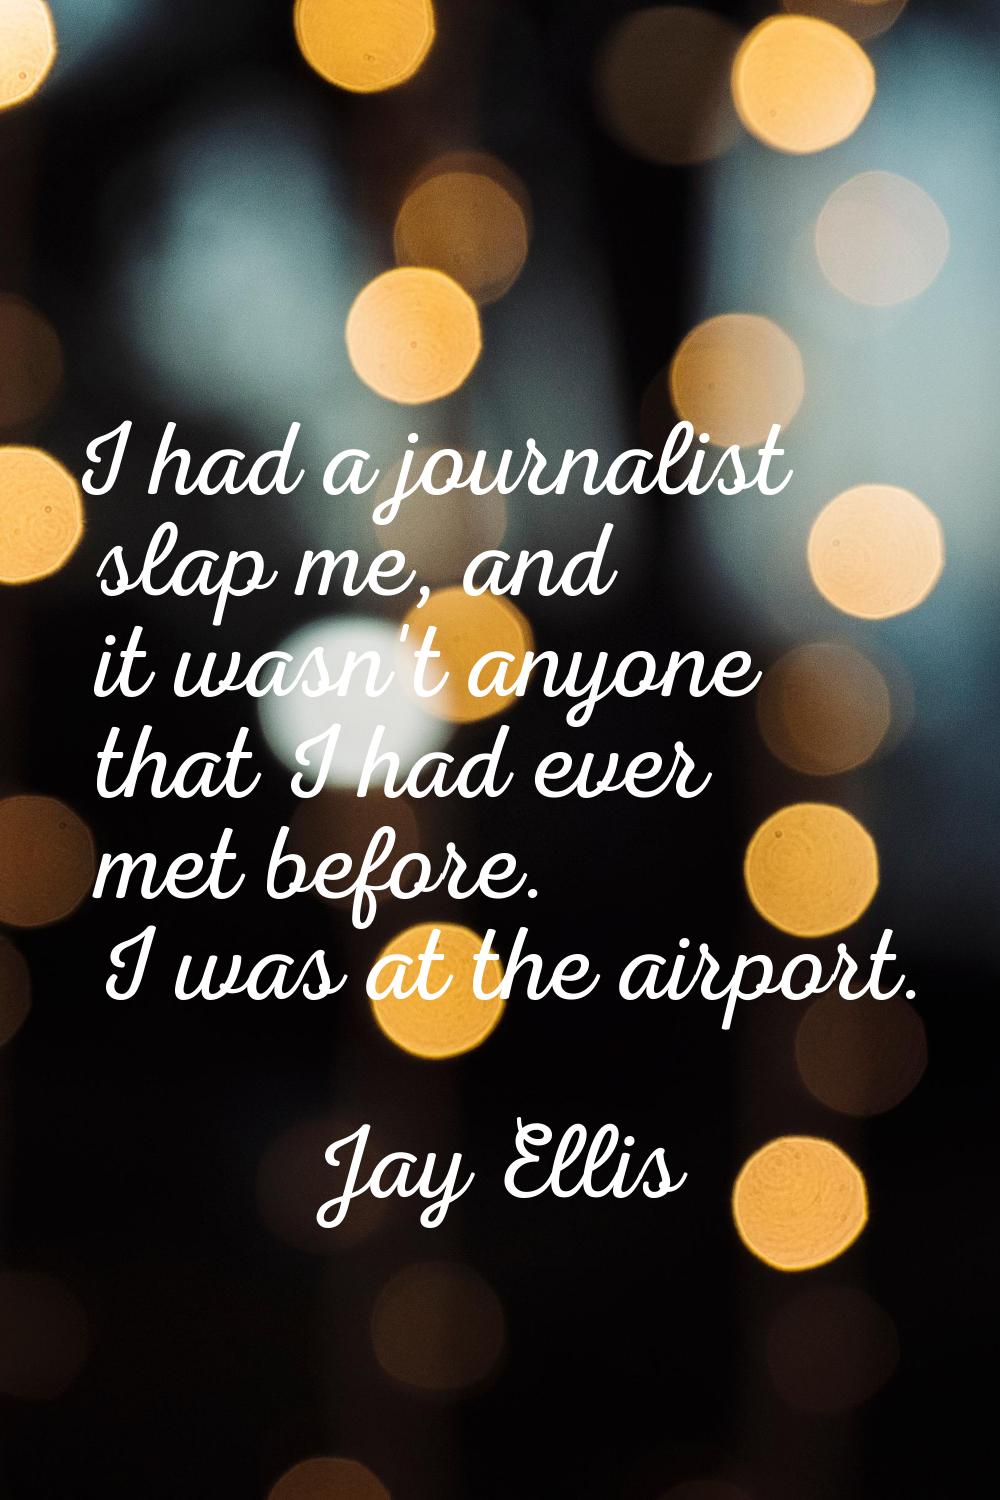 I had a journalist slap me, and it wasn't anyone that I had ever met before. I was at the airport.